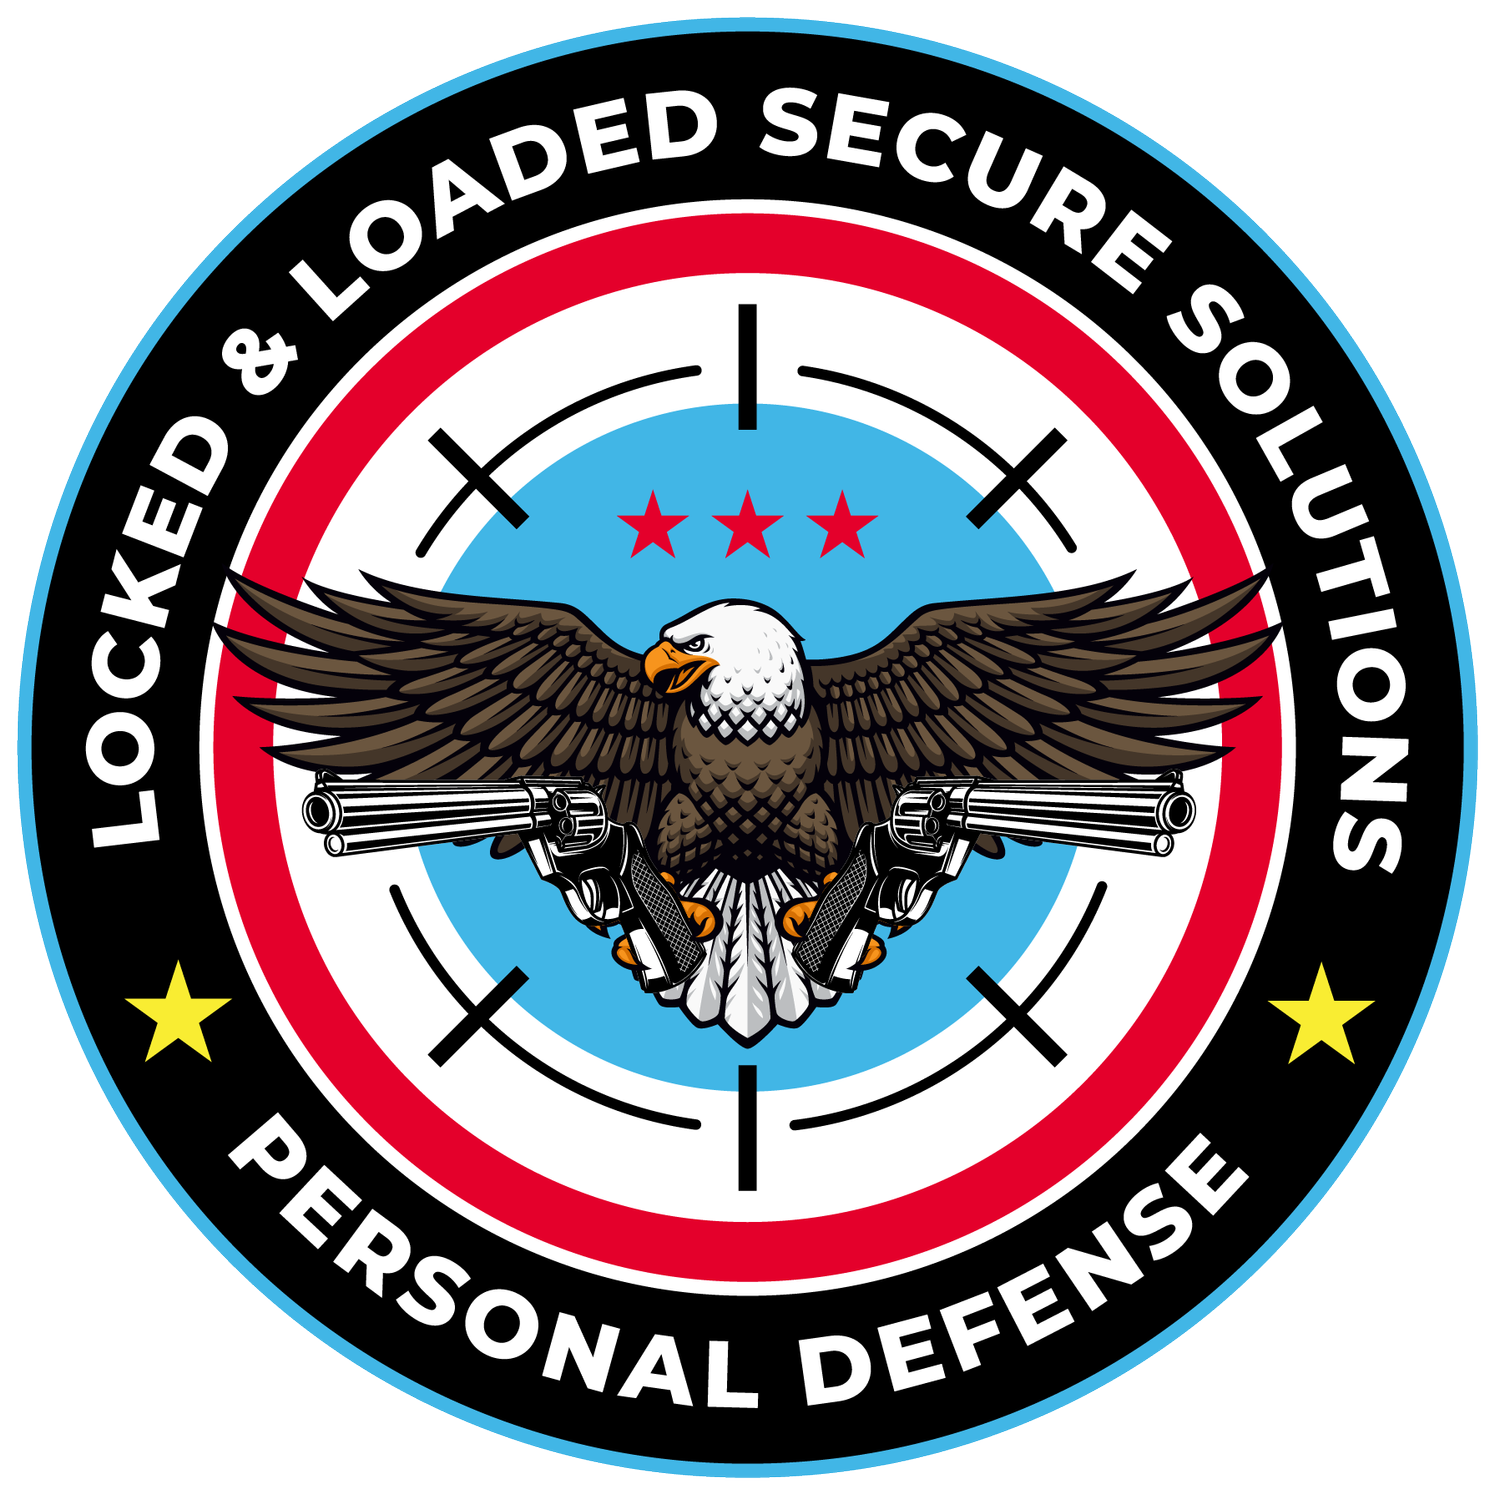 Locked &amp; Loaded Secure Solutions | Firearms Training | Security Consulting